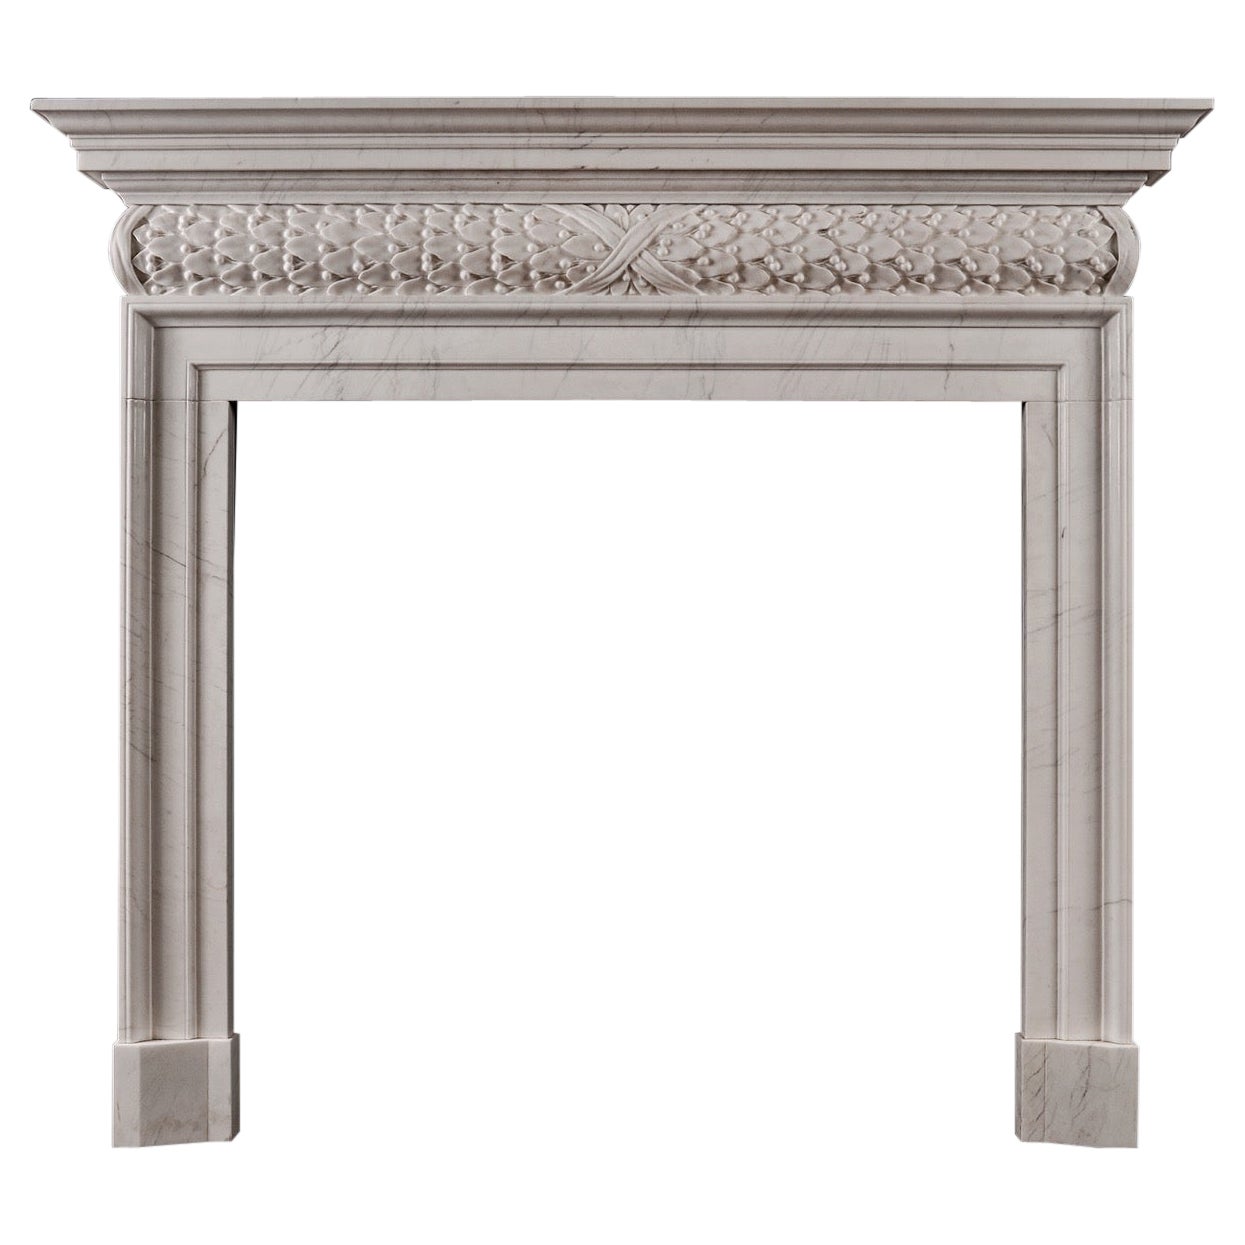 Mid-18th Century Style White Marble Fireplace